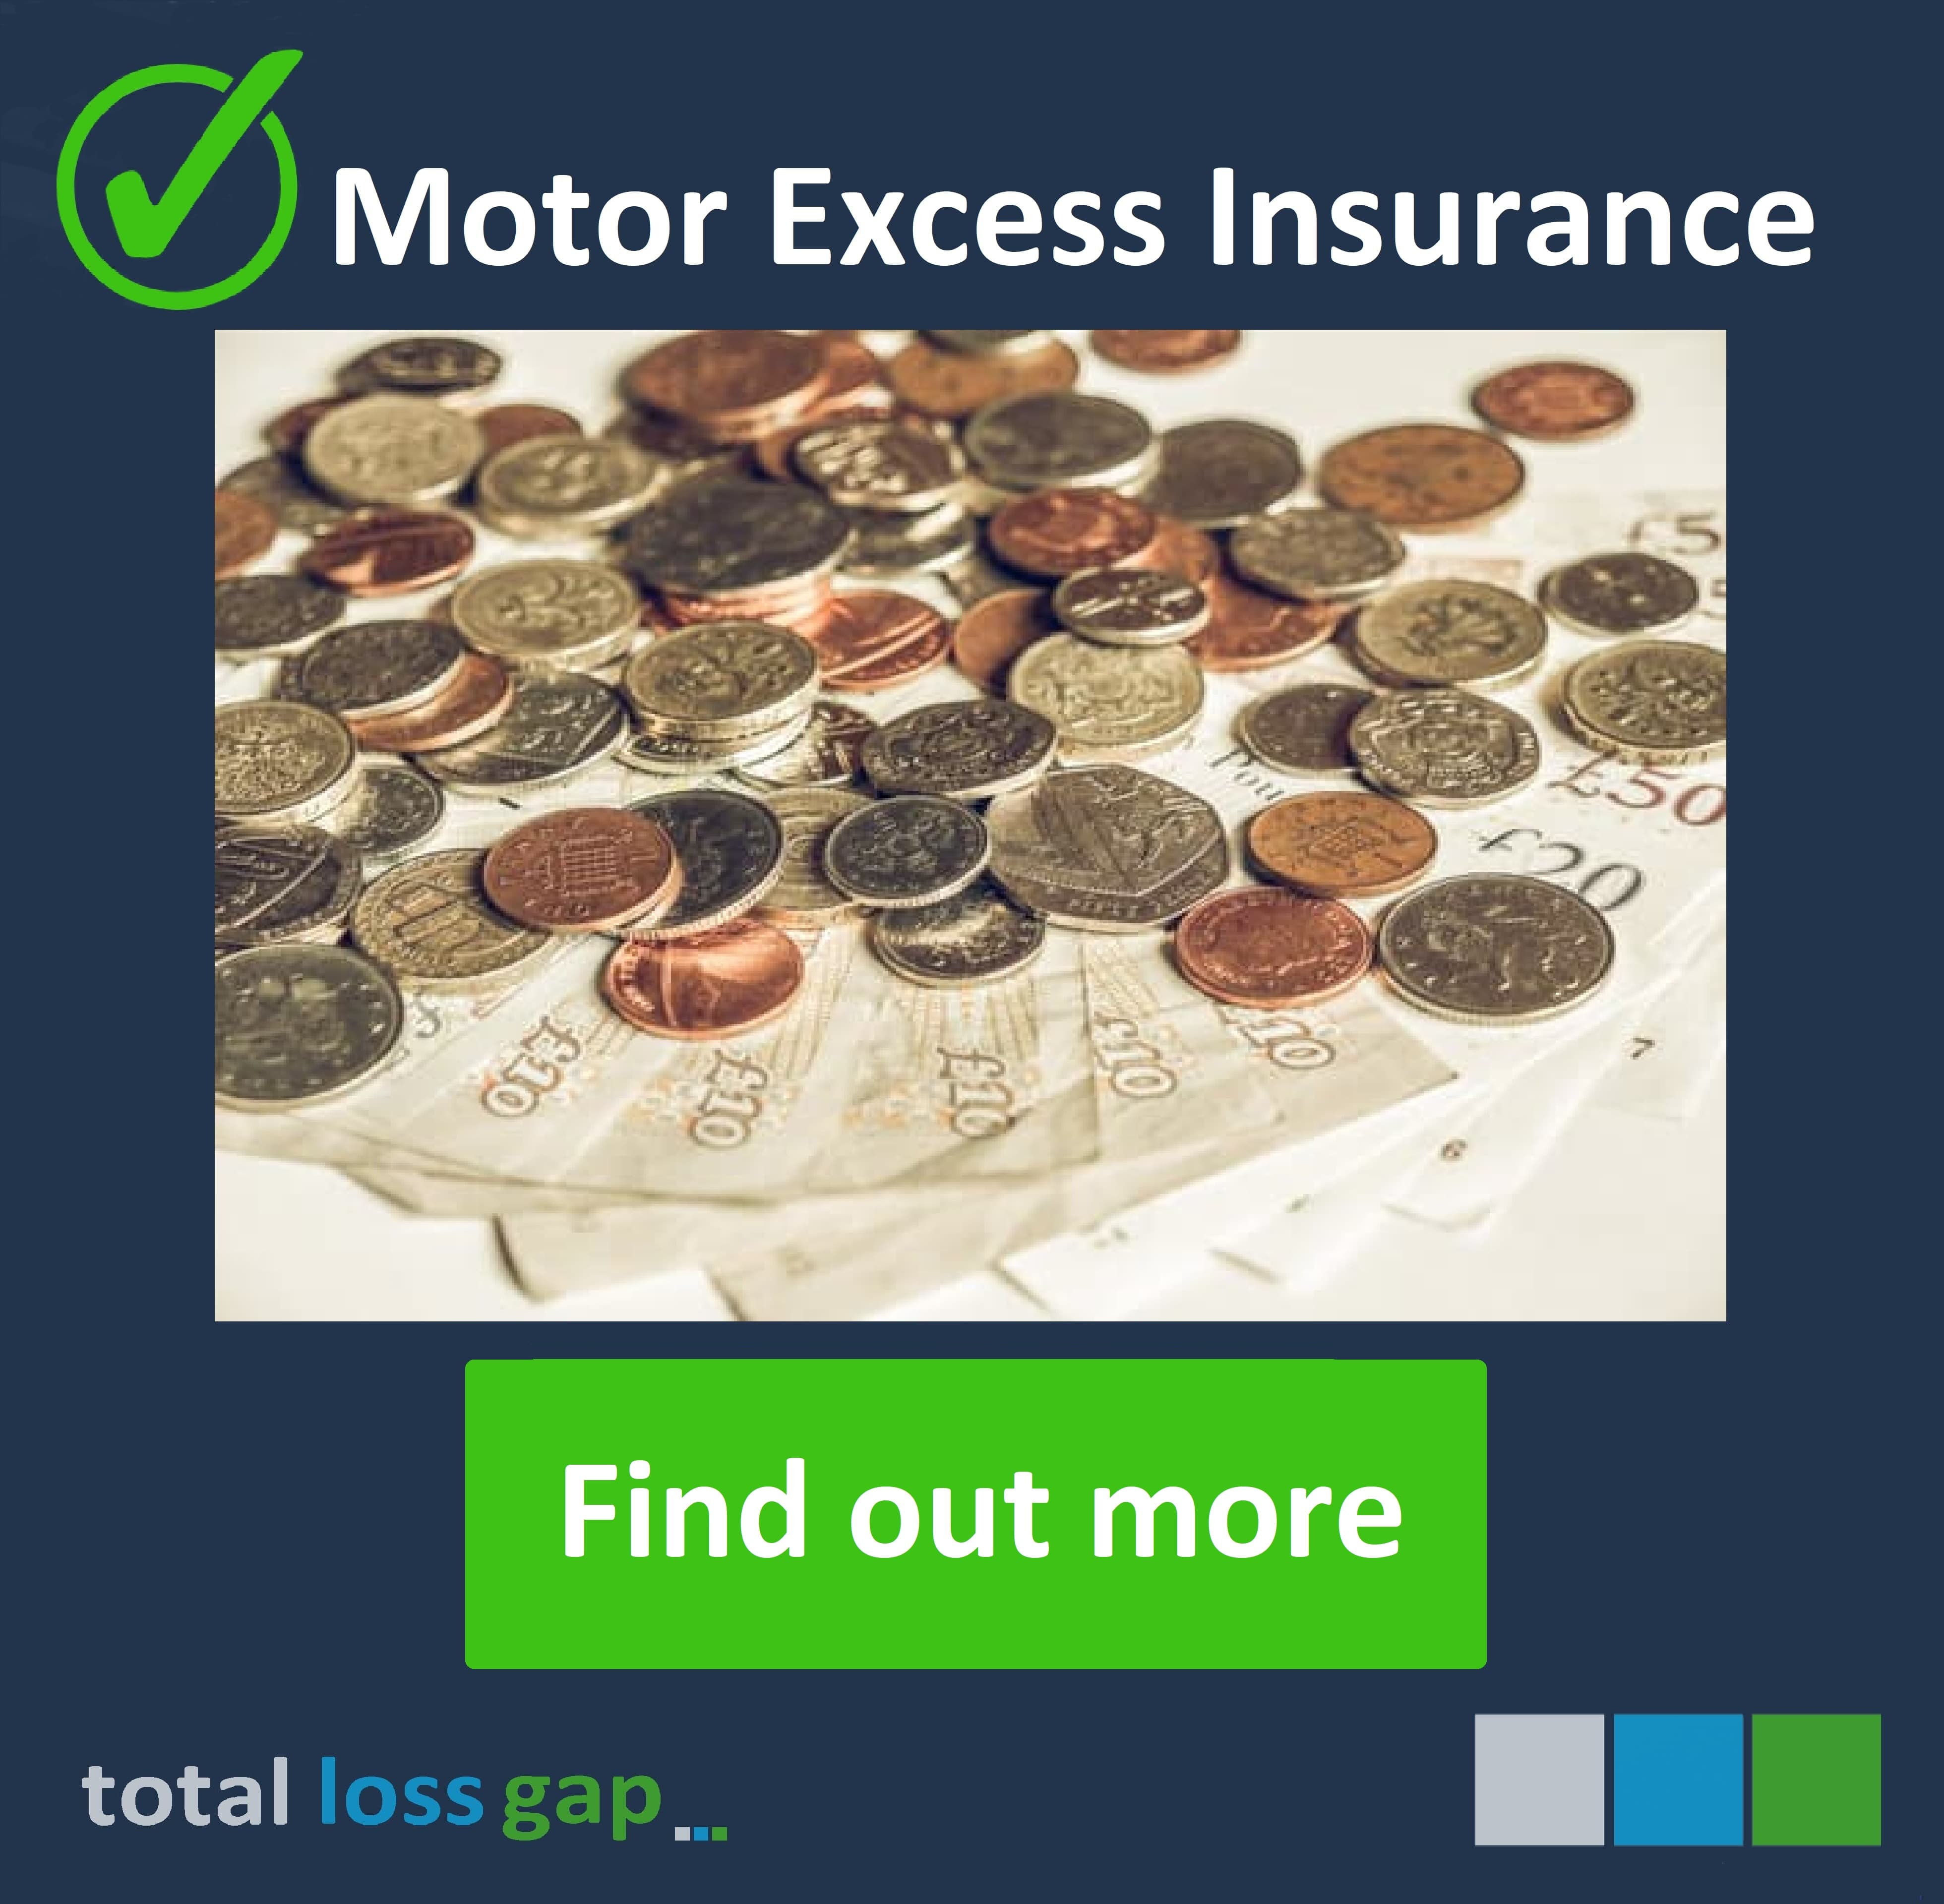 Find out more about Excess cover